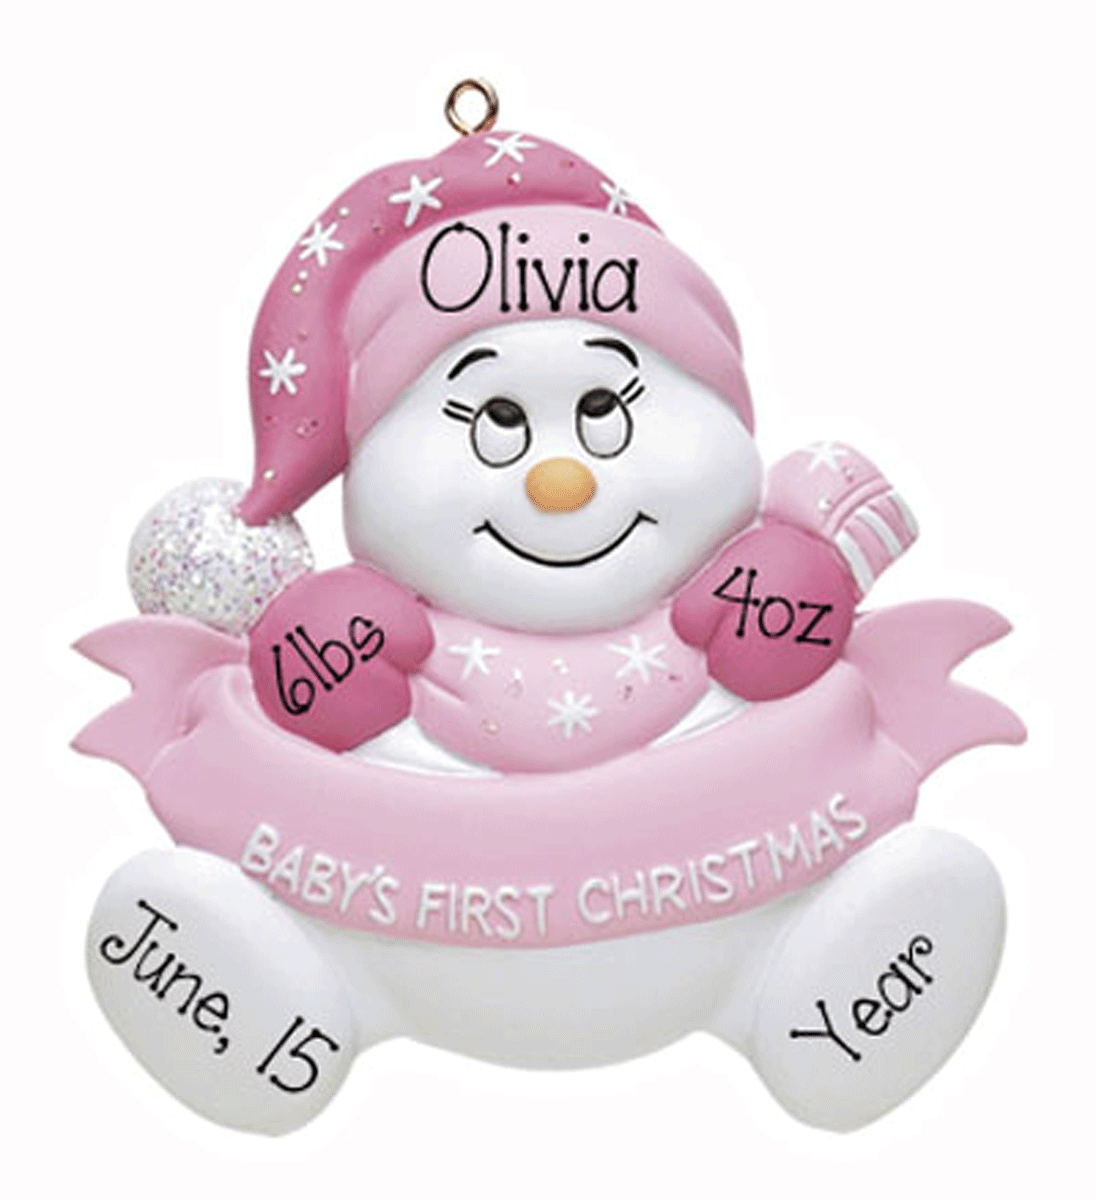 Snow Baby Ornament, My Personalized Ornaments